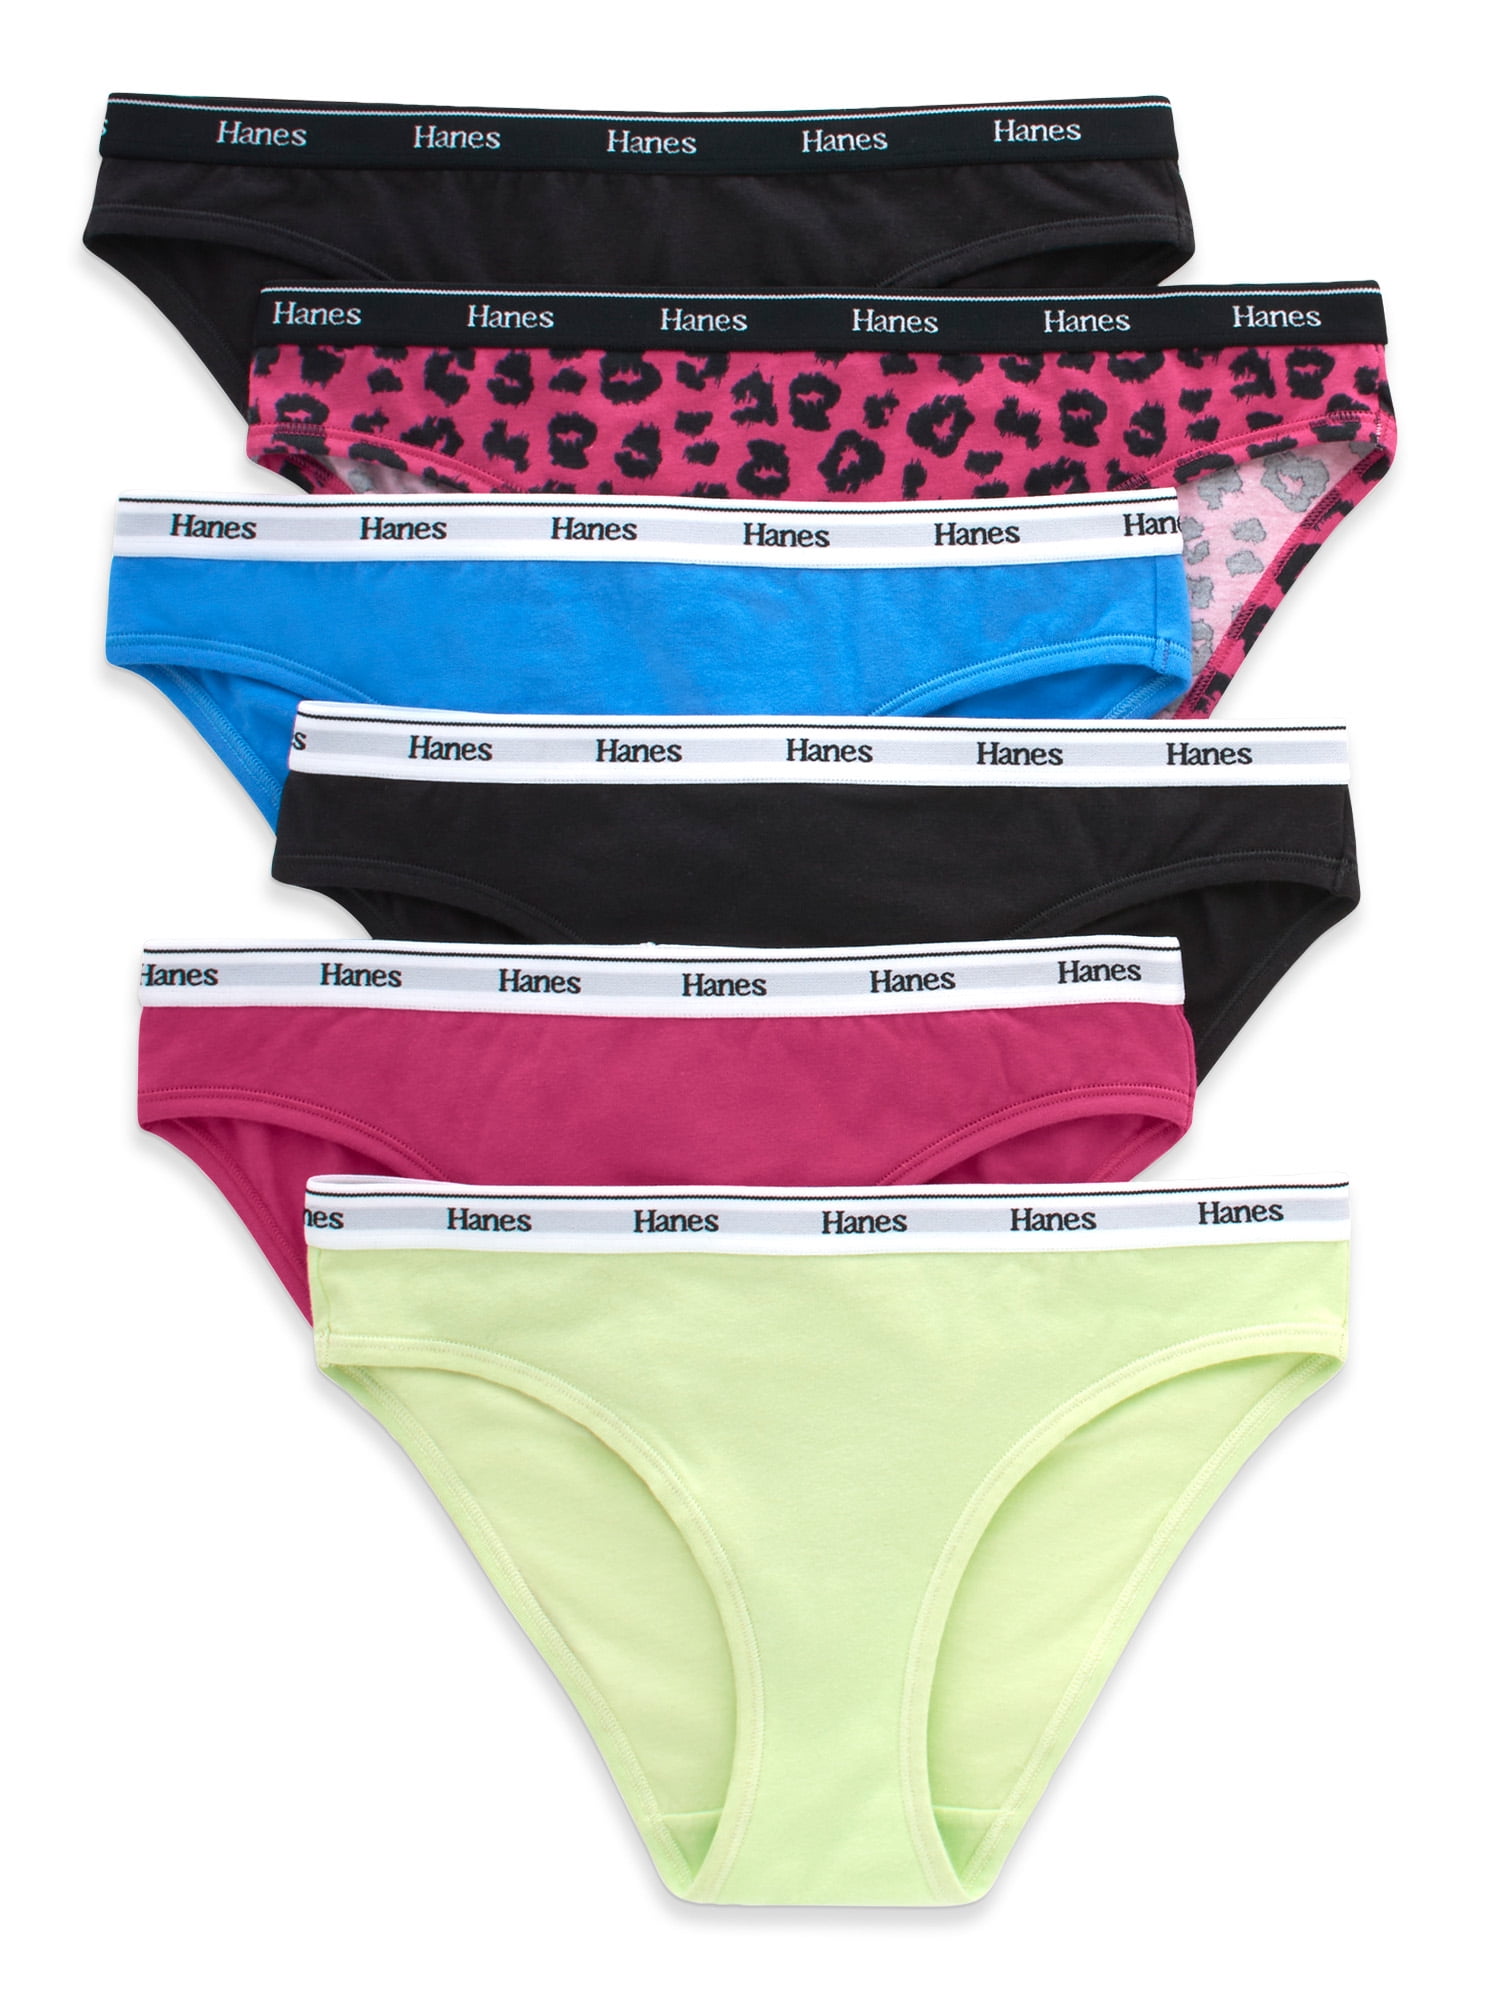 6-Pack  Essentials Women's Cotton Bikini Brief Underwear (Various)  from $6.30 + Free Shipping w/ Prime or on $35+